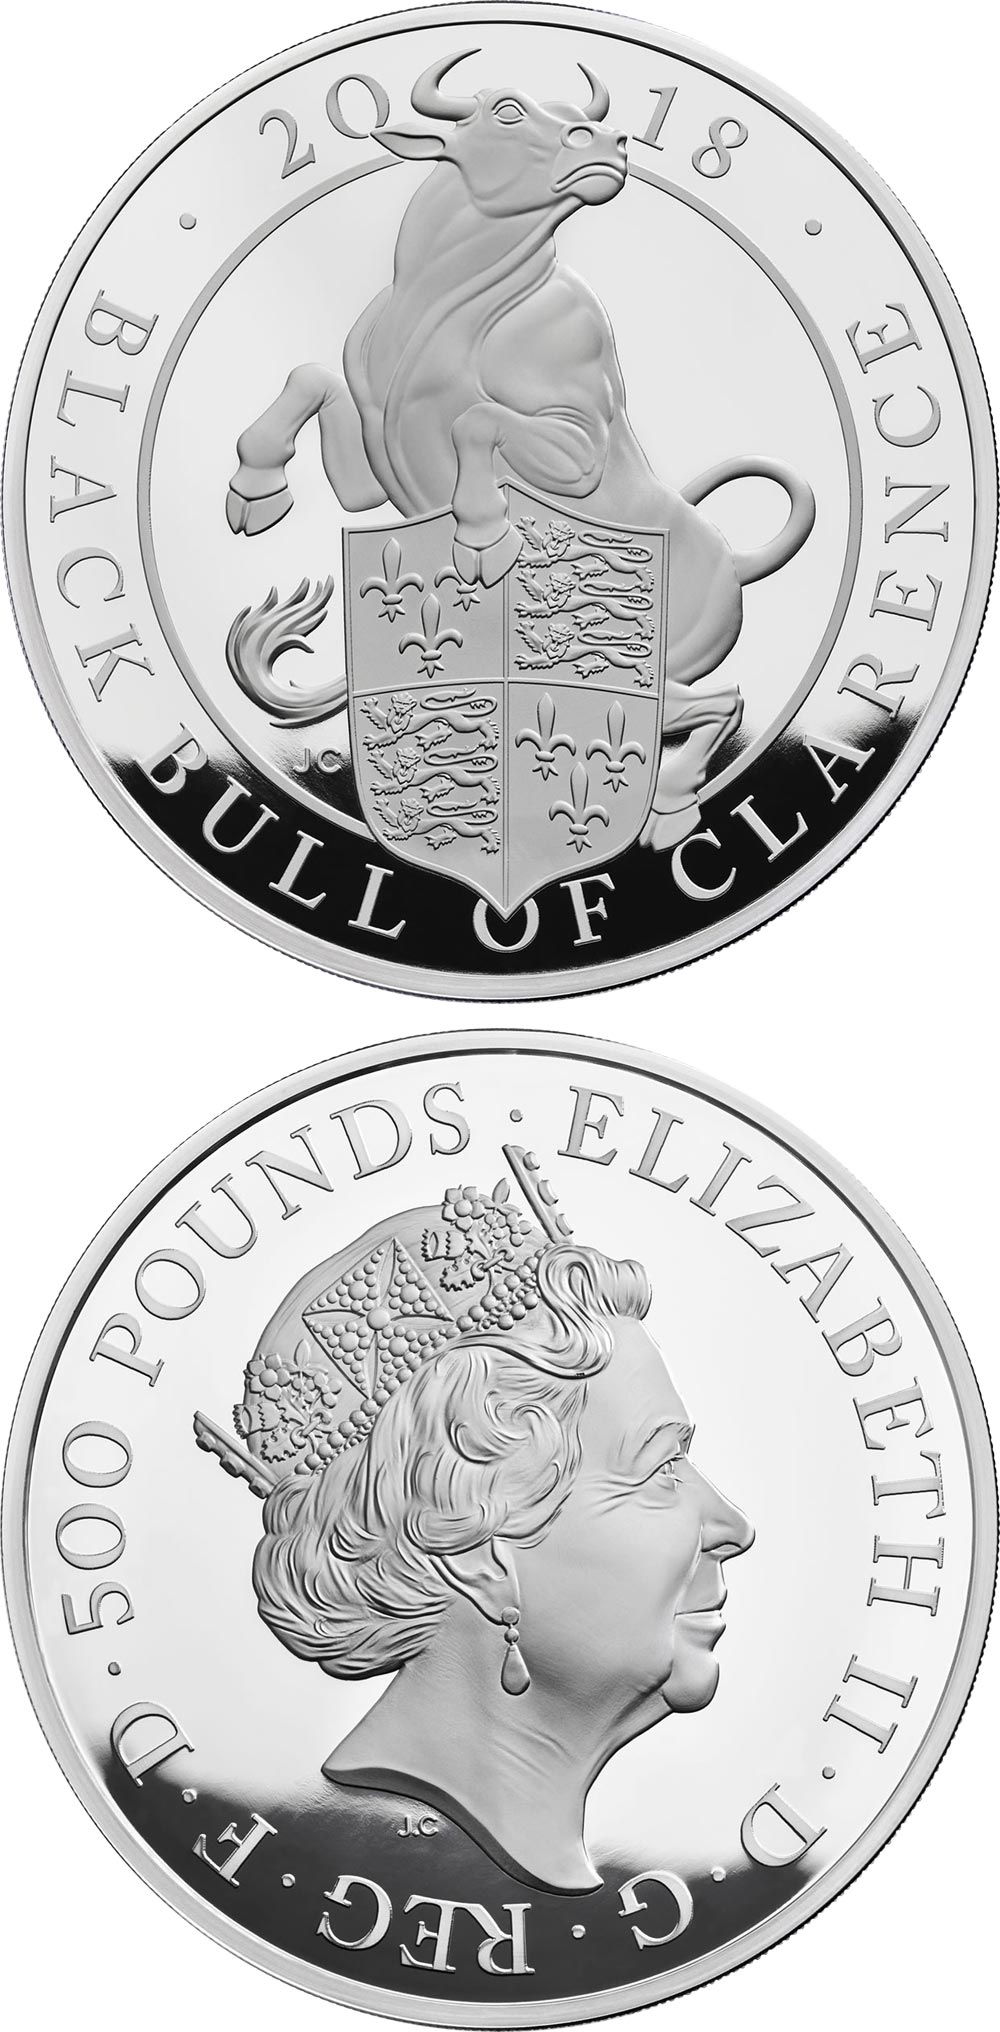 Image of 500 pounds coin - The Black Bull of Clarence | United Kingdom 2018.  The Silver coin is of Proof quality.